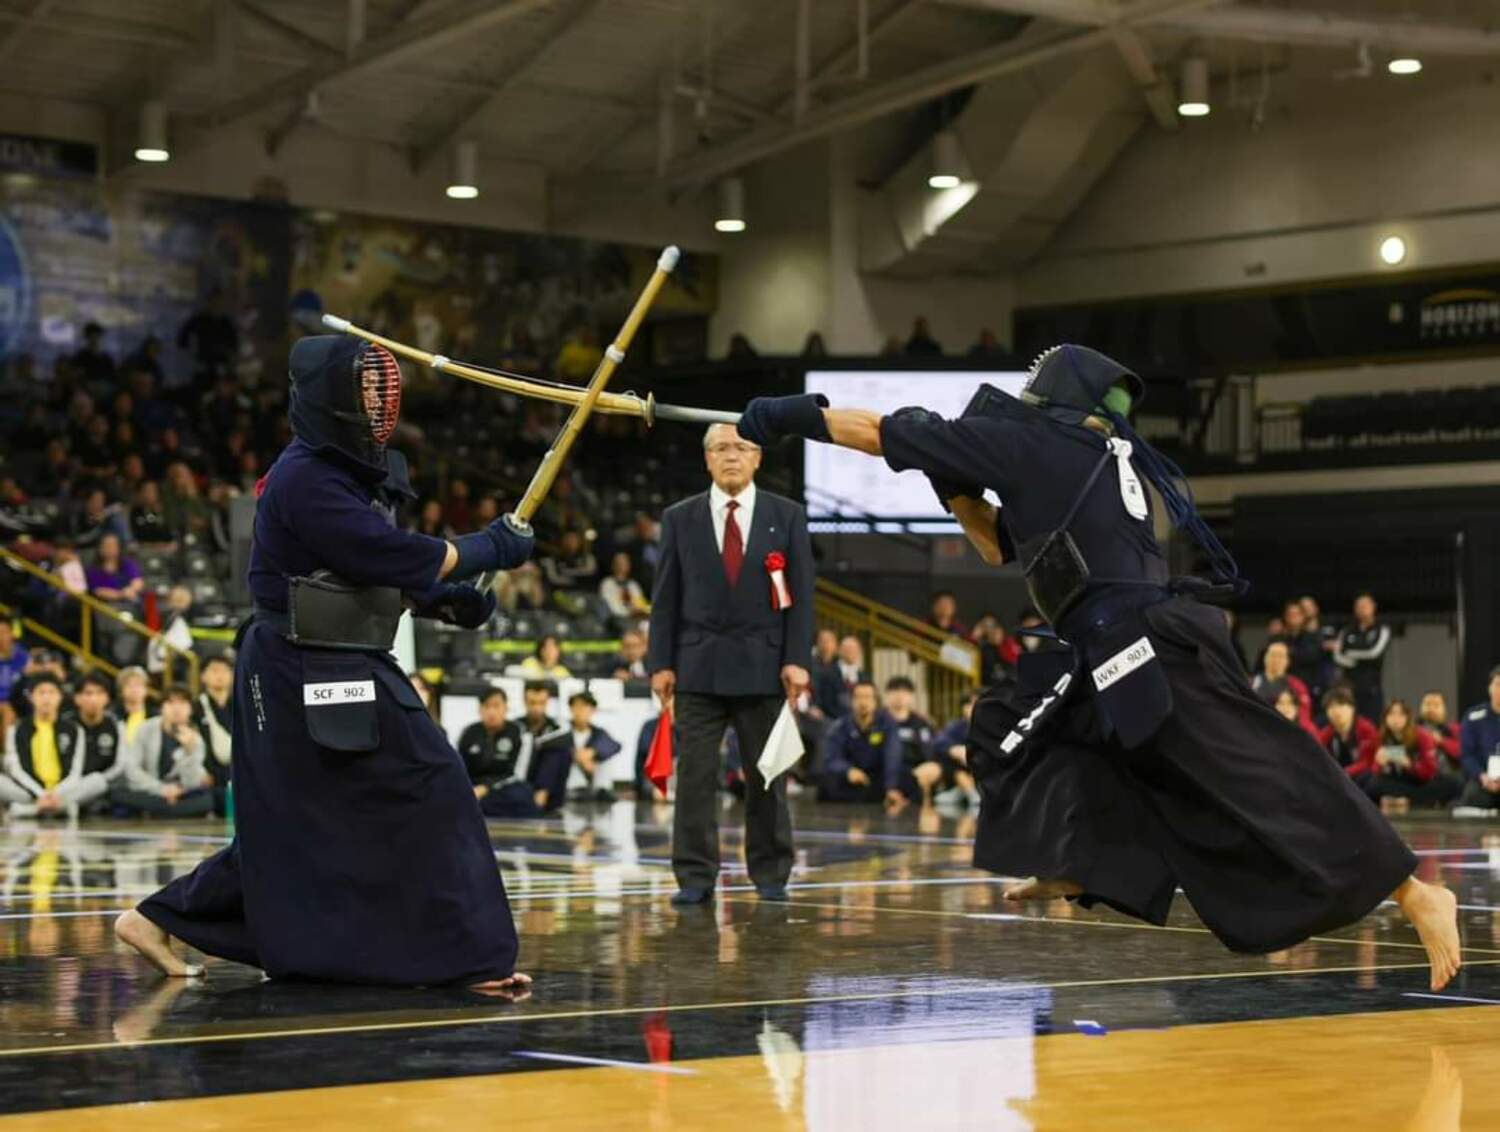 Kendo is a Japanese martial art practiced with bamboo swords and body armor.    KENDO PHOTOGRAPHY